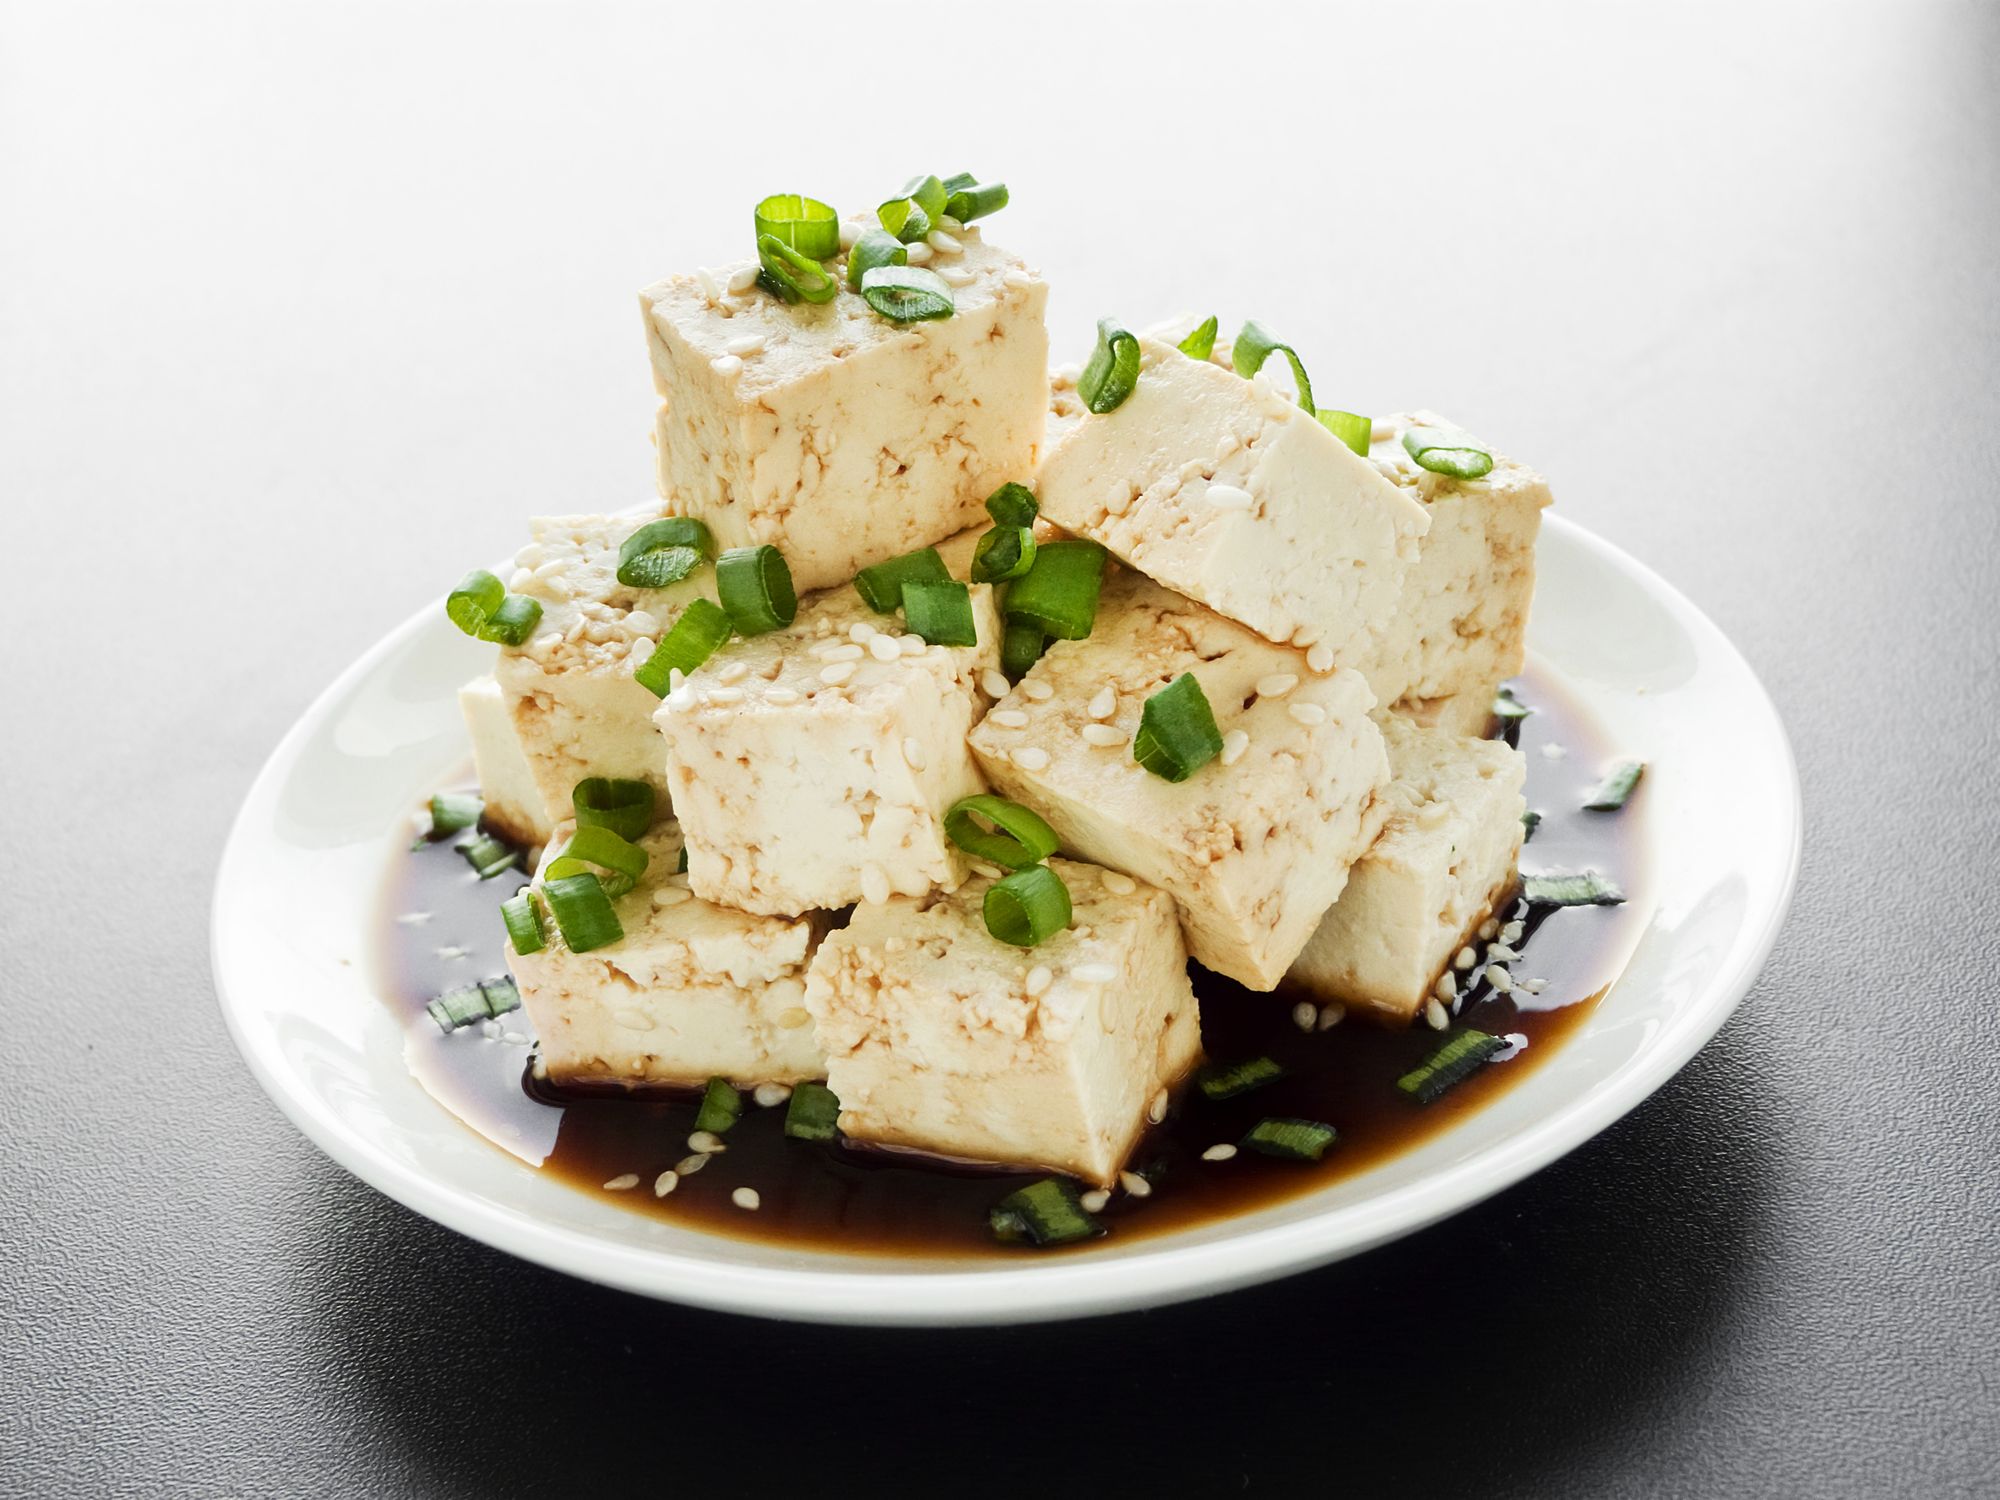 Steamed Chilli Soy Tofu